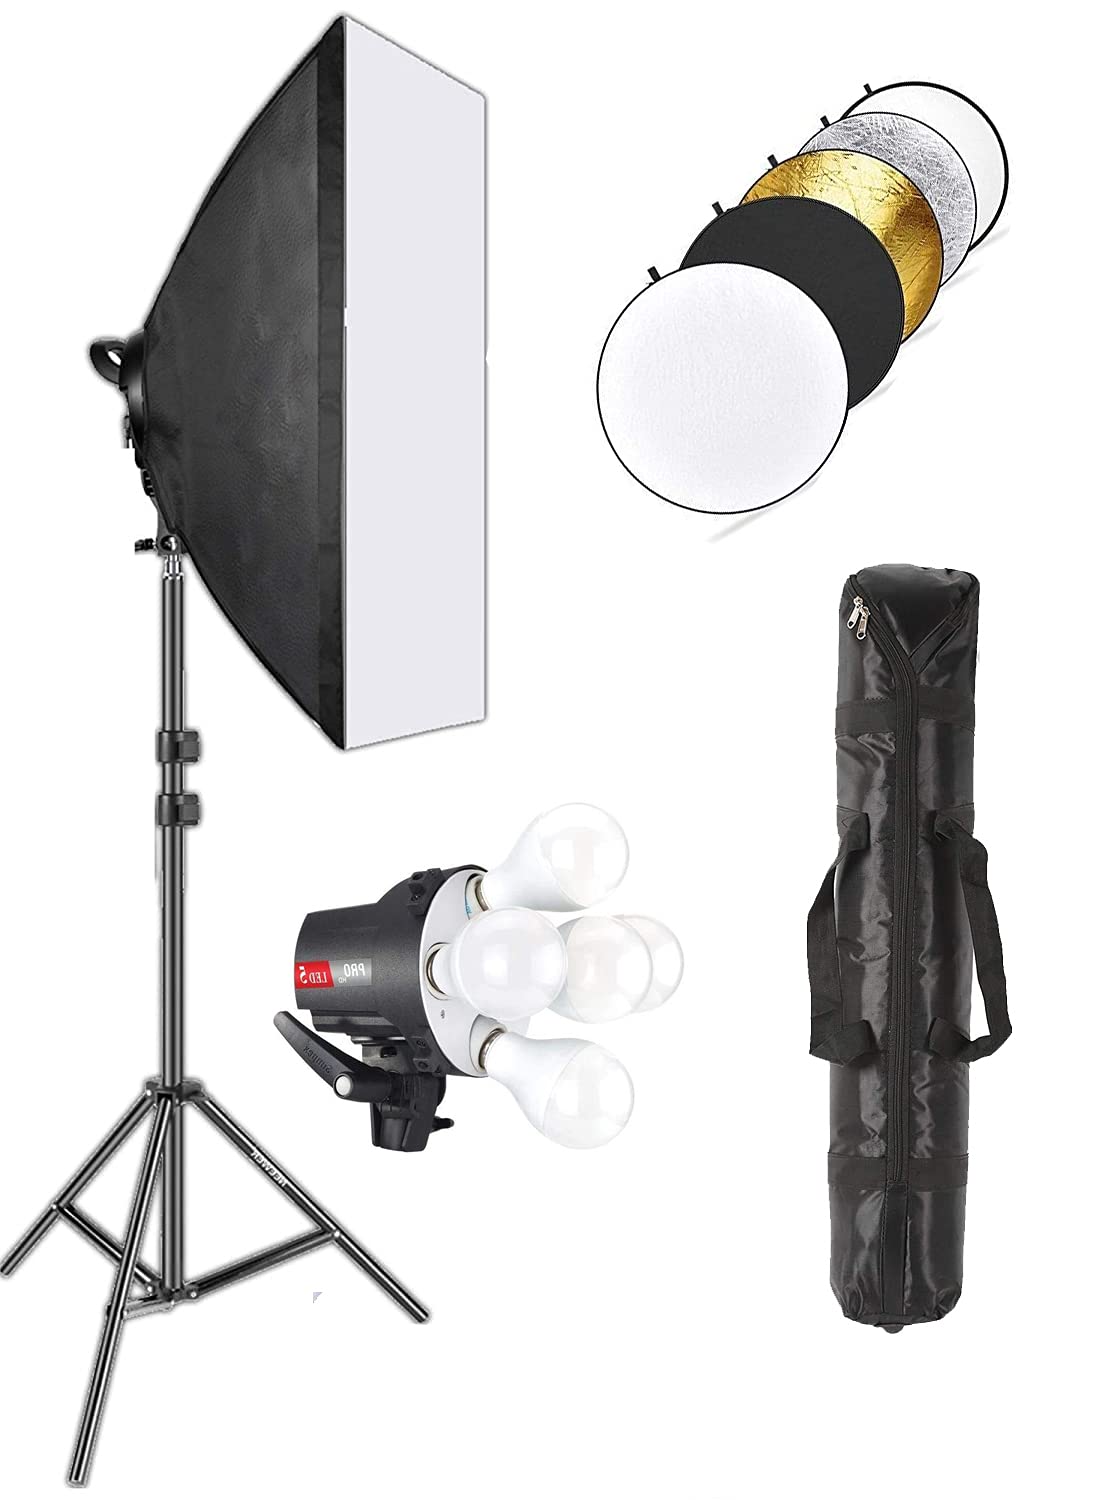 Buy Simpex Ring Light Stand 7ft Online at Low Price in India | Simpex  Camera Reviews & Ratings - Amazon.in